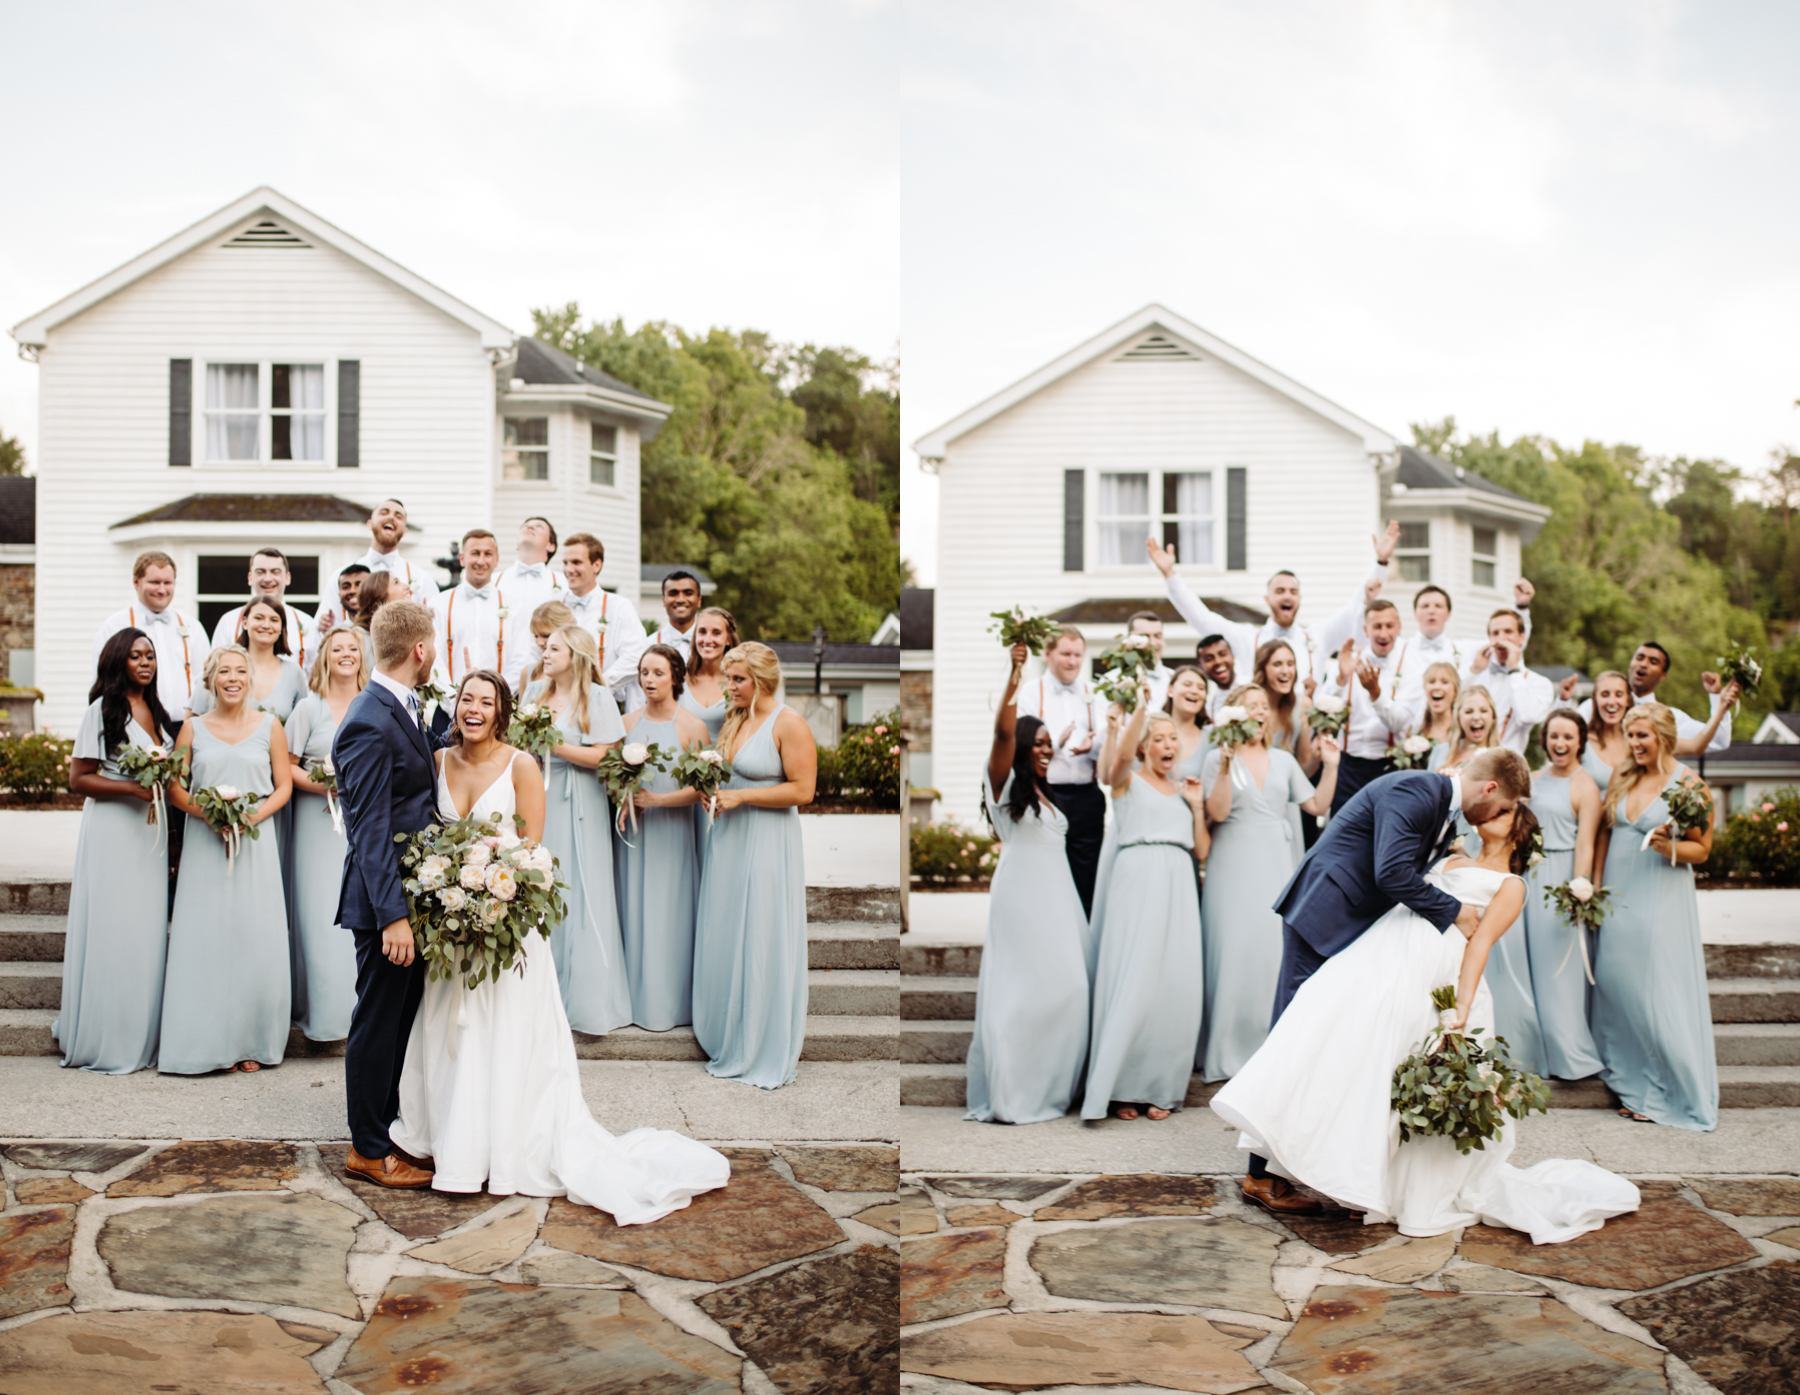 Full bridal party photos at a Sunny summer wedding at Dara's Garden in Knoxville, Tennessee 